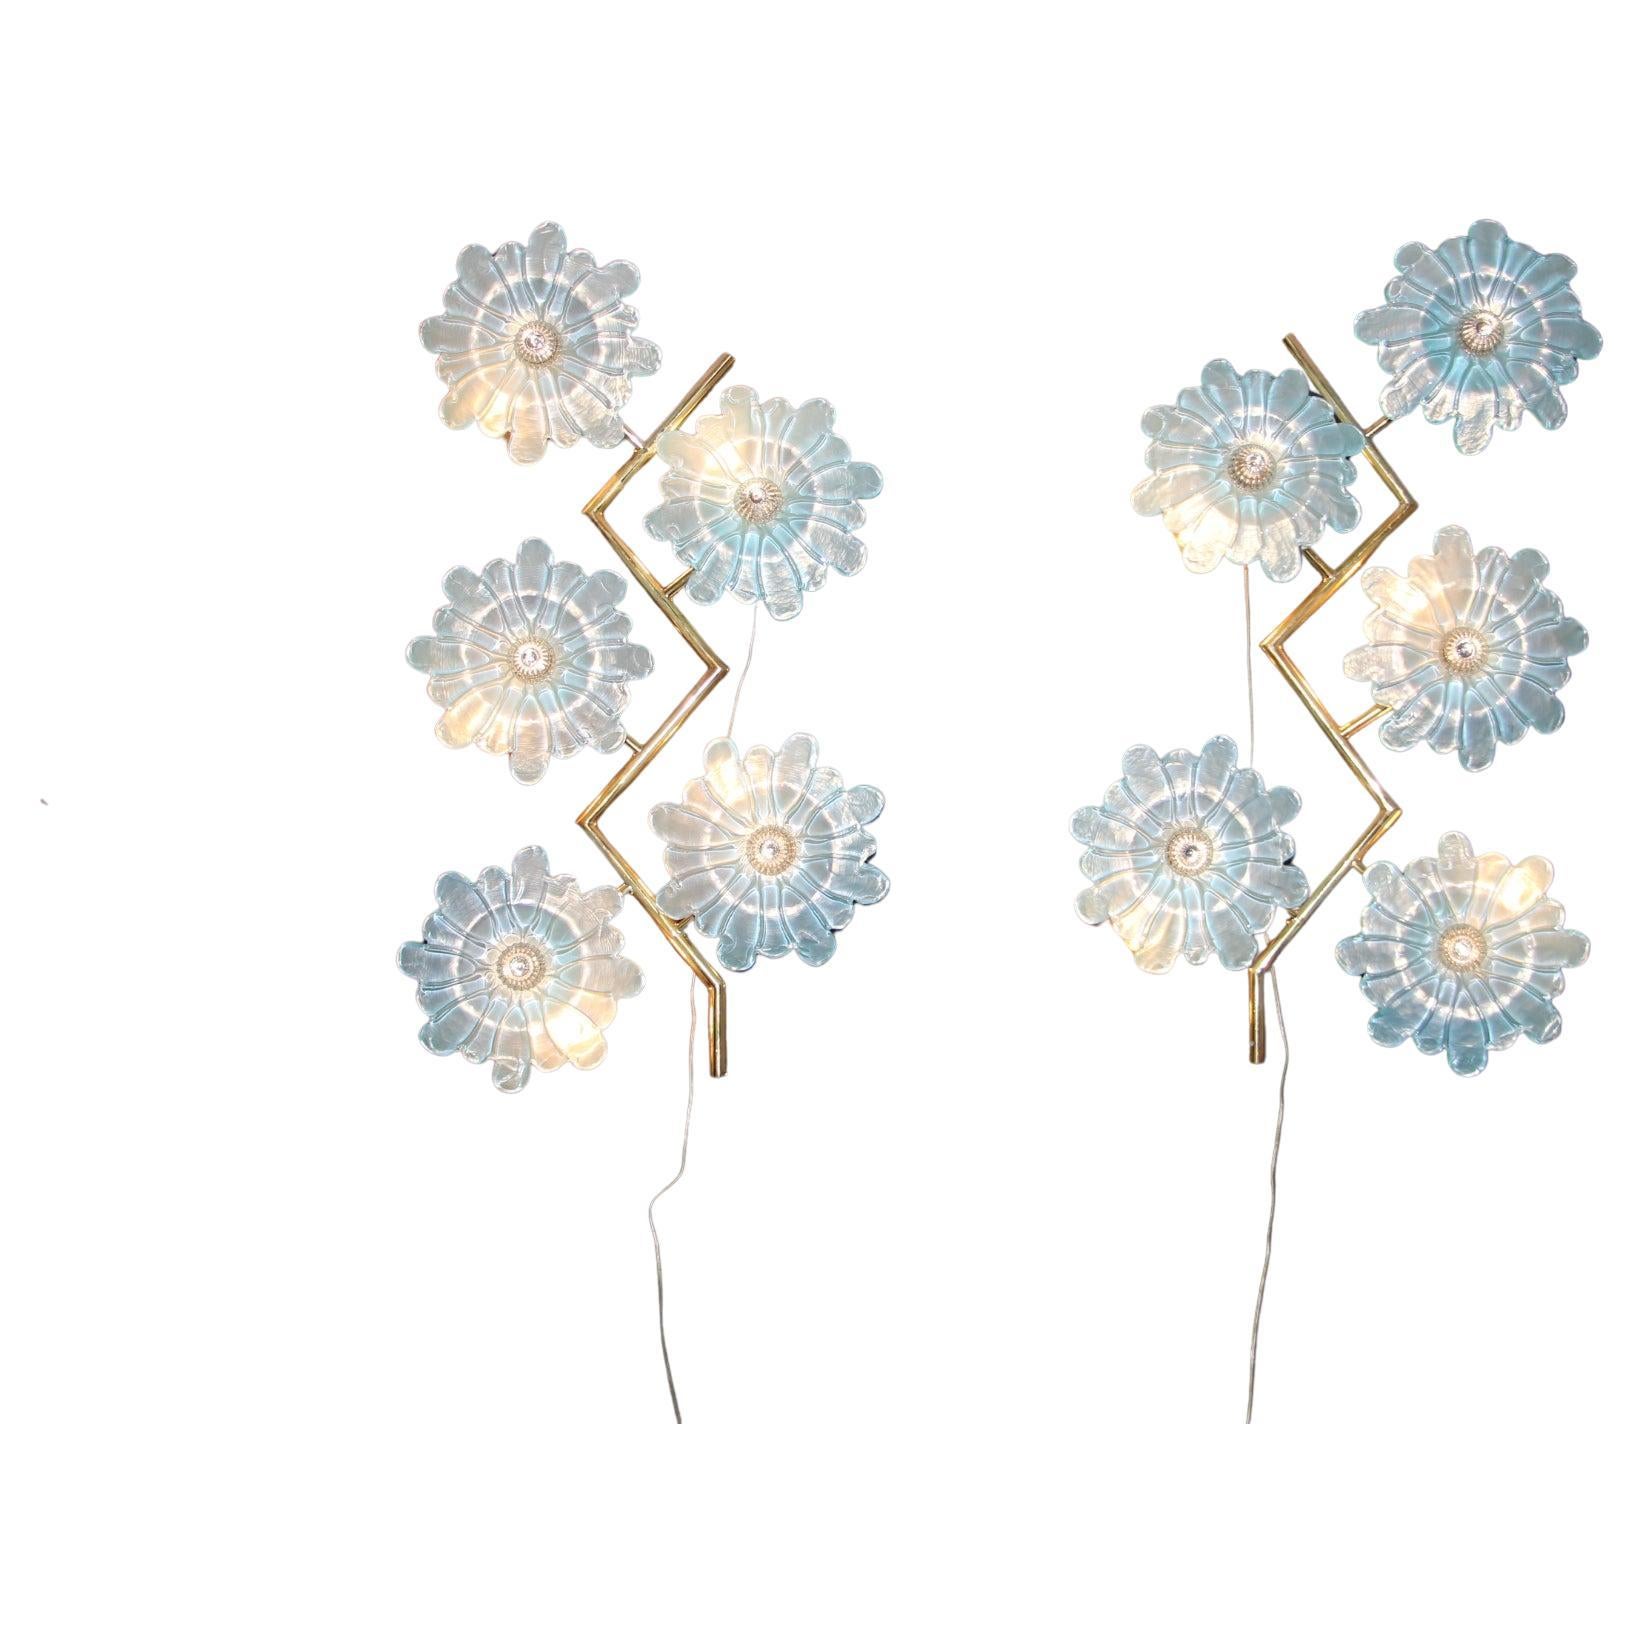 This beautiful pair of sconces features zig zag brass frame and 5 iridescent blue Murano glass flowers.These flowers were made by hand in Murano and their center piece is made of a crystal color glass studs.They are very romantic and unusual as well